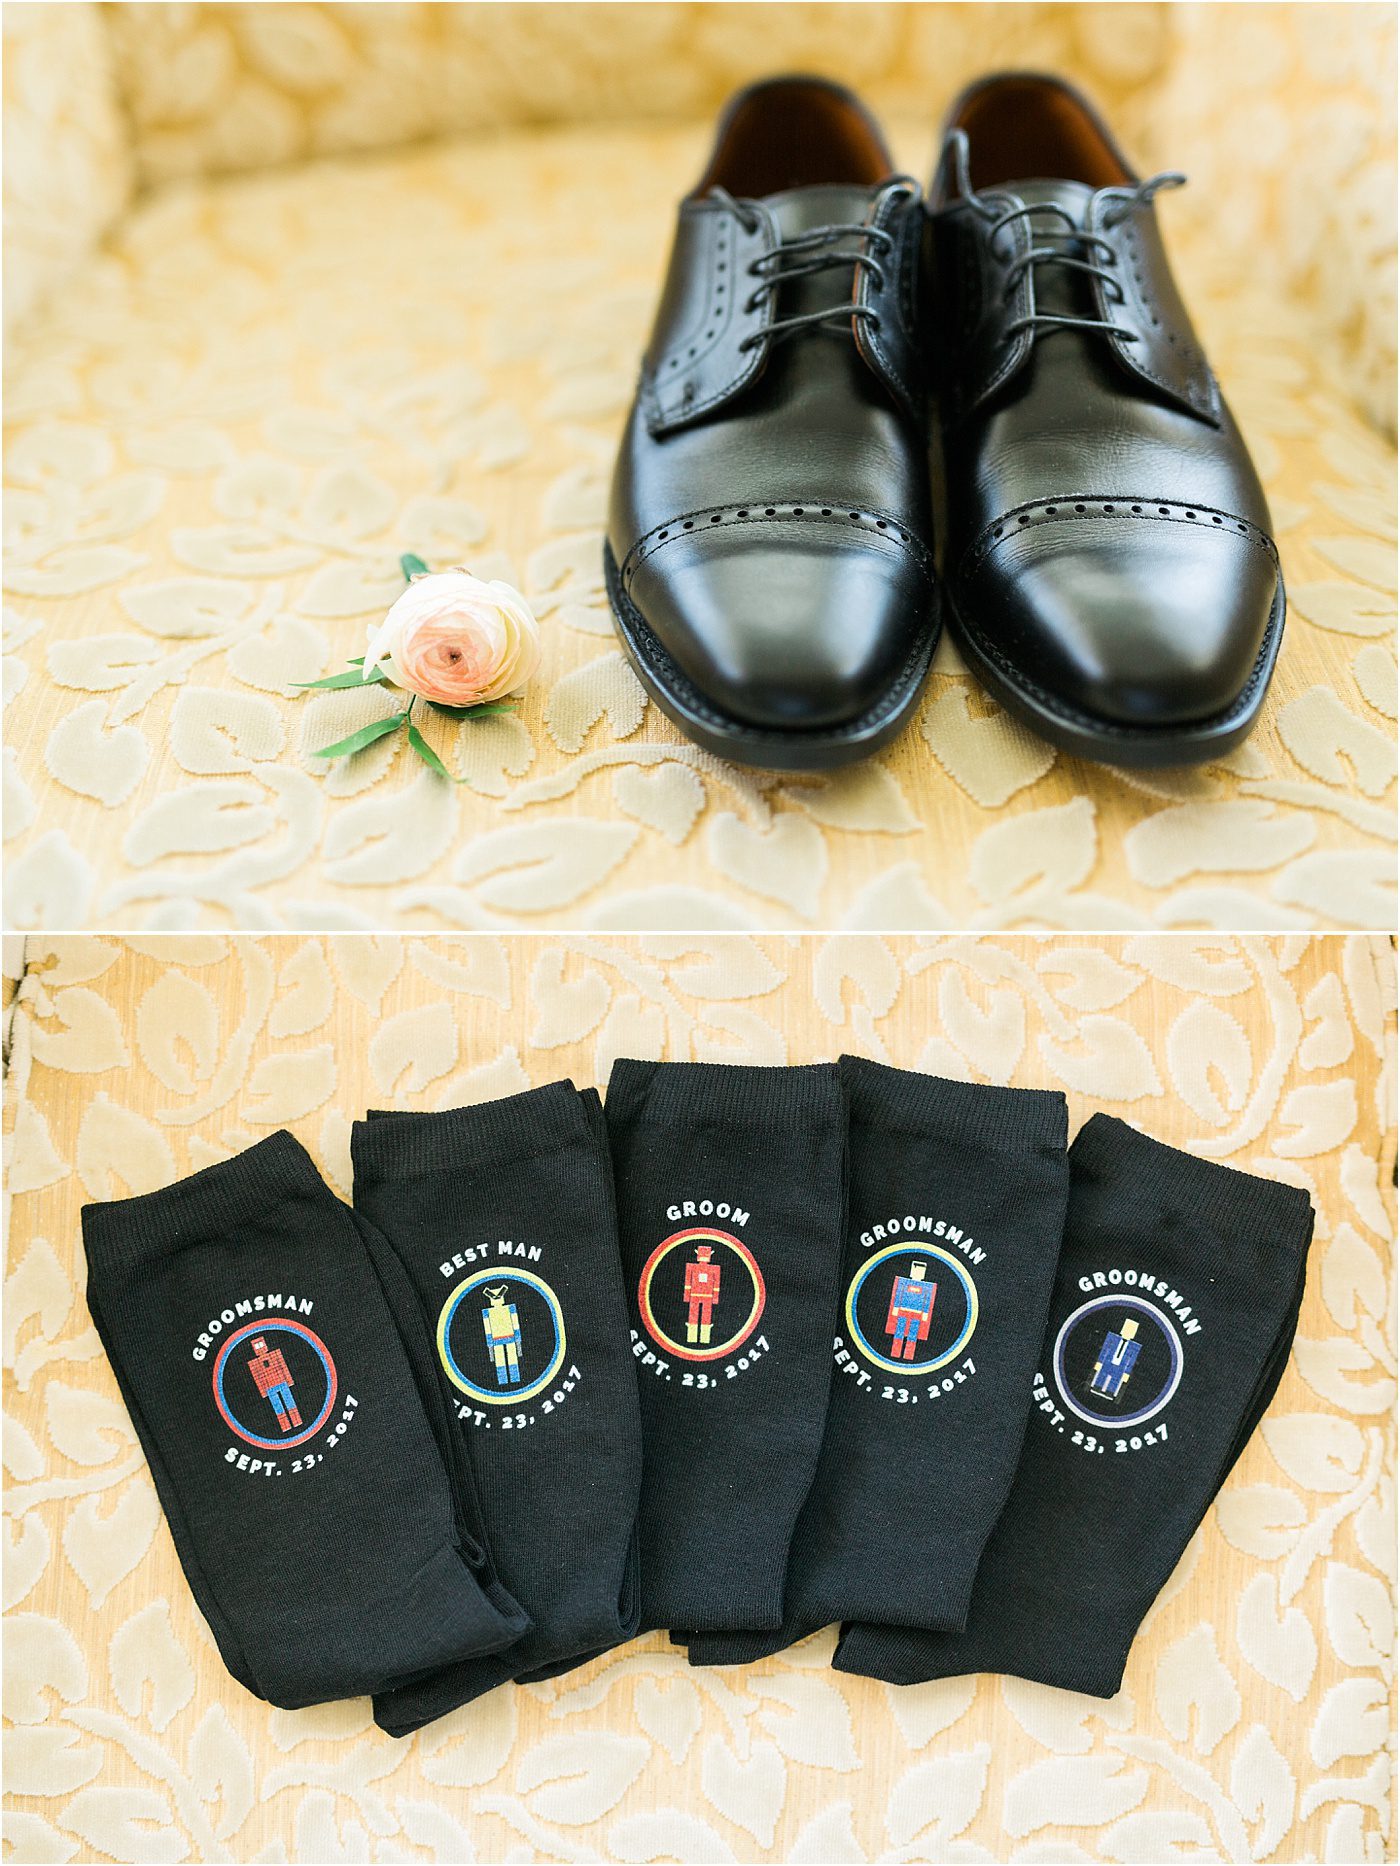 Meridian House Wedding in Washington DC by Catherine Ann Photography